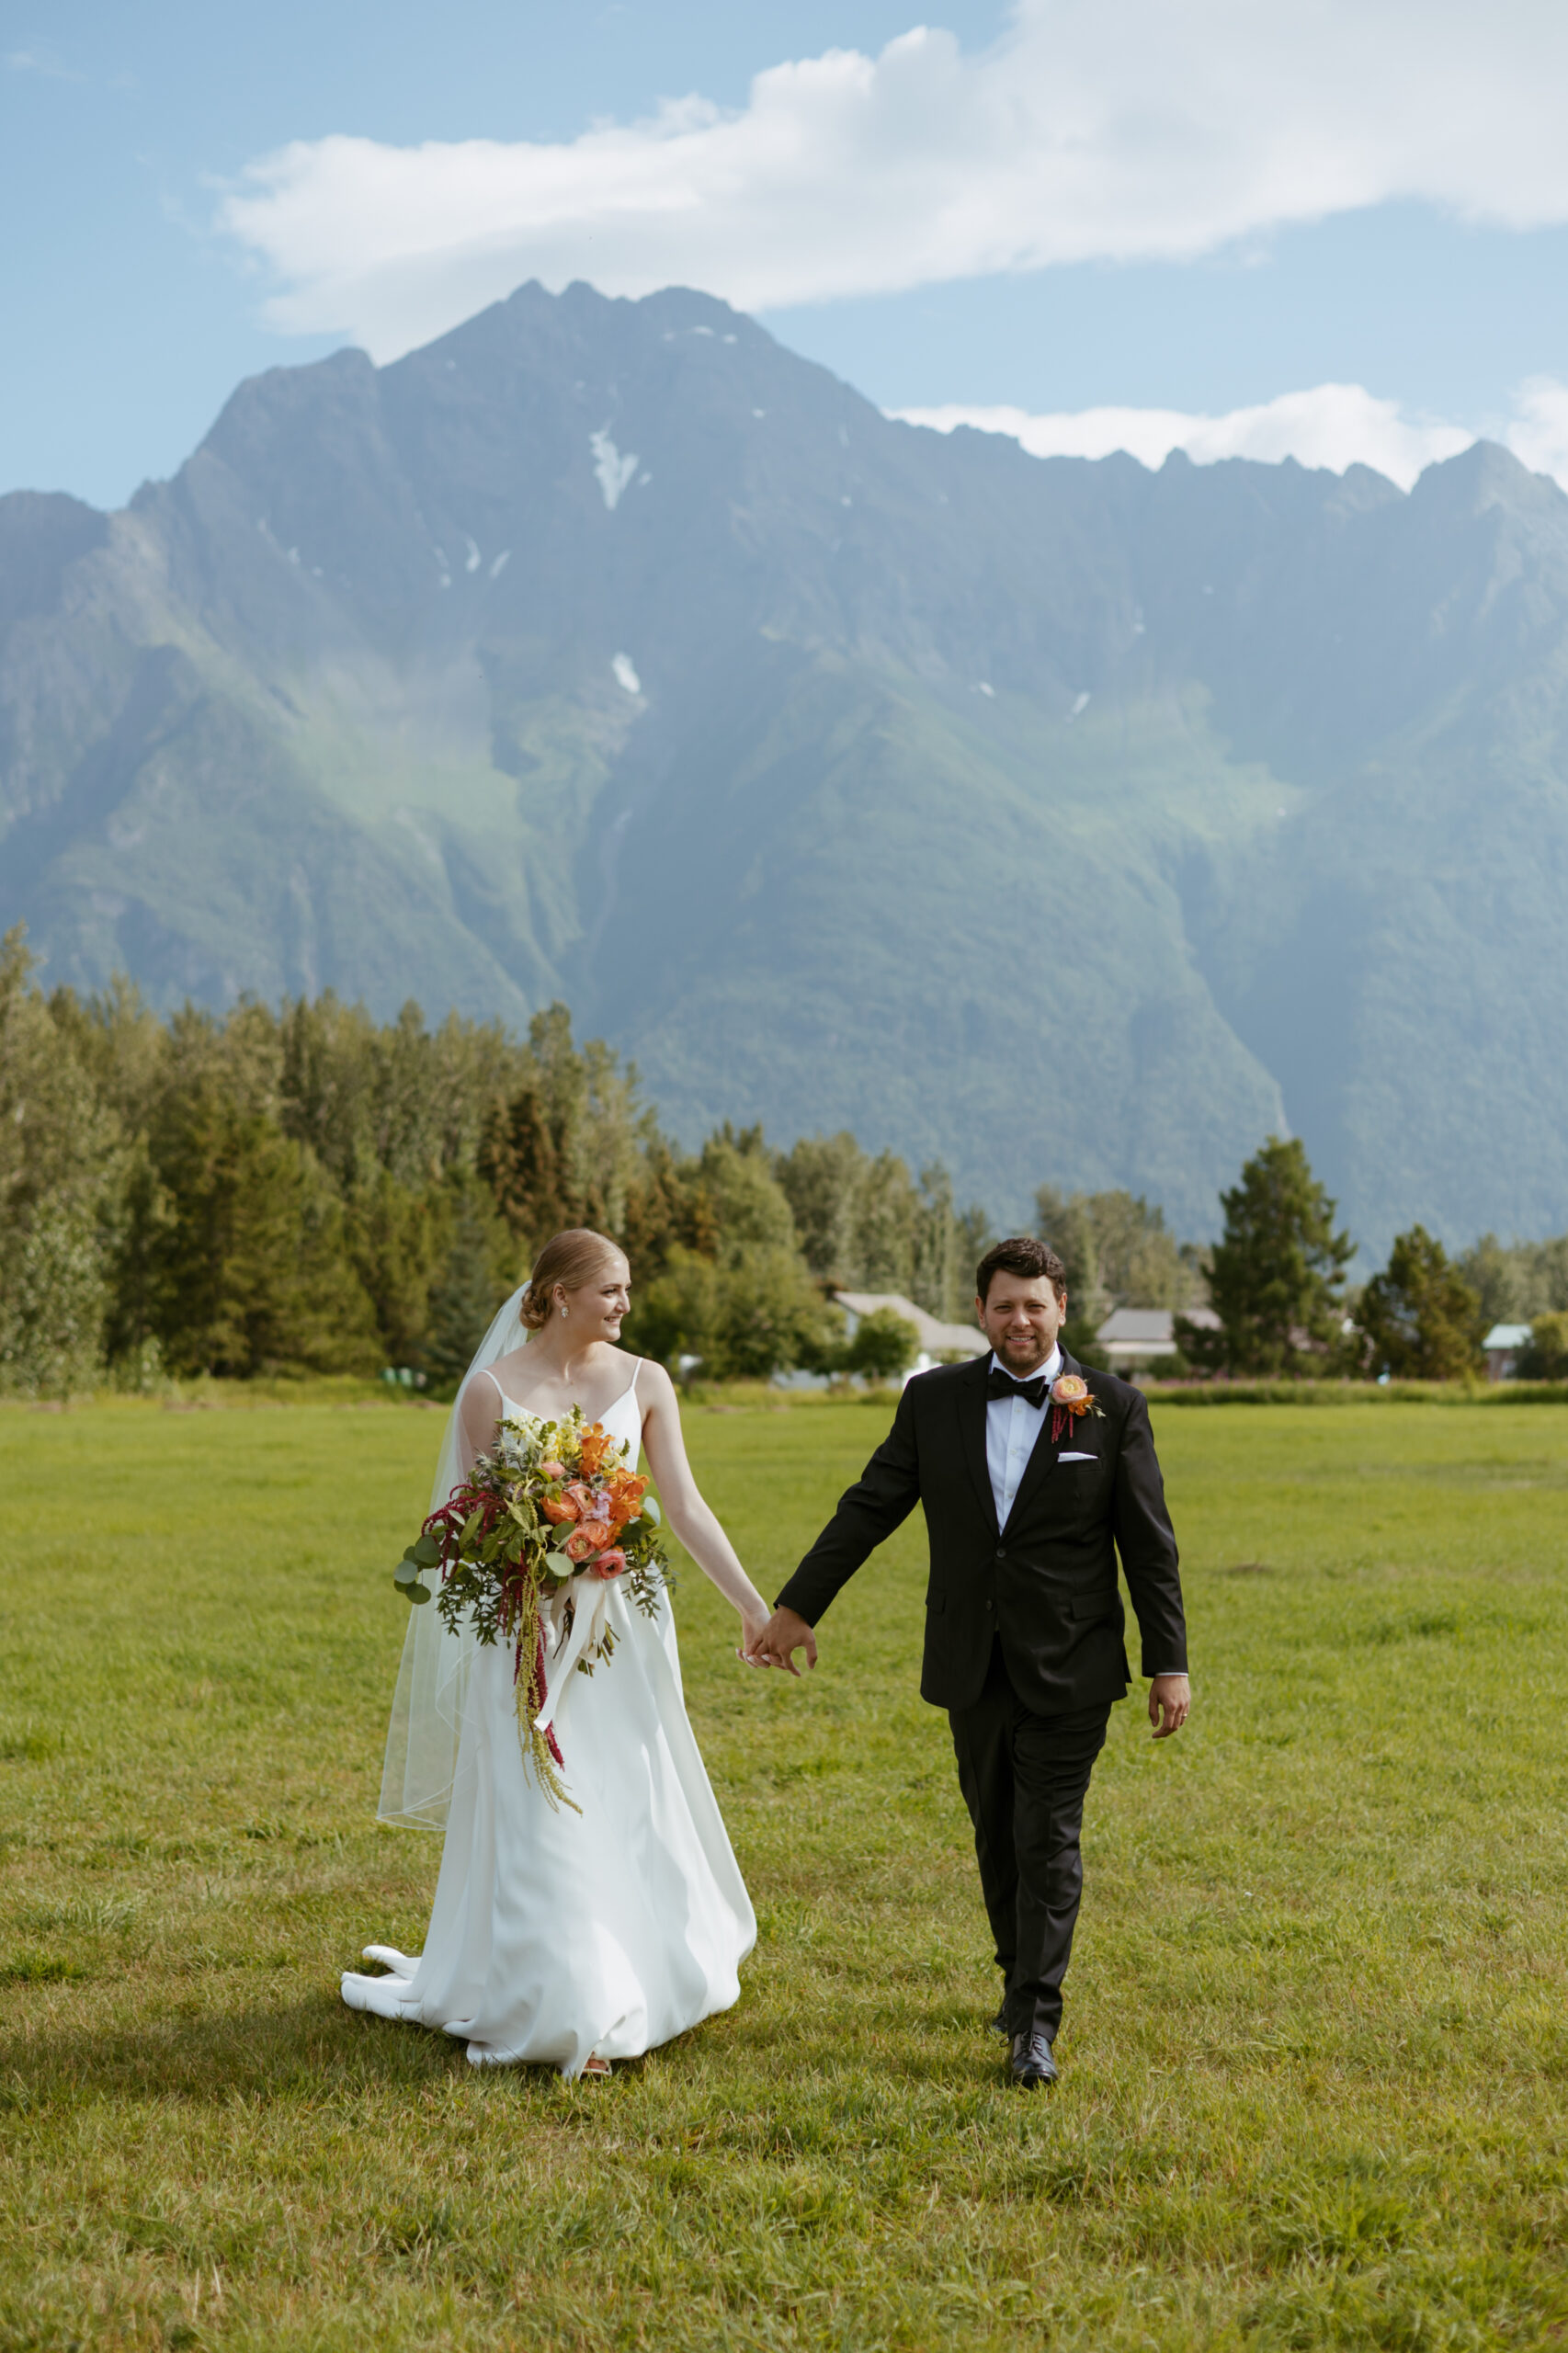 Wedding couple holding hands while walking together in a field with a mountain in the background.